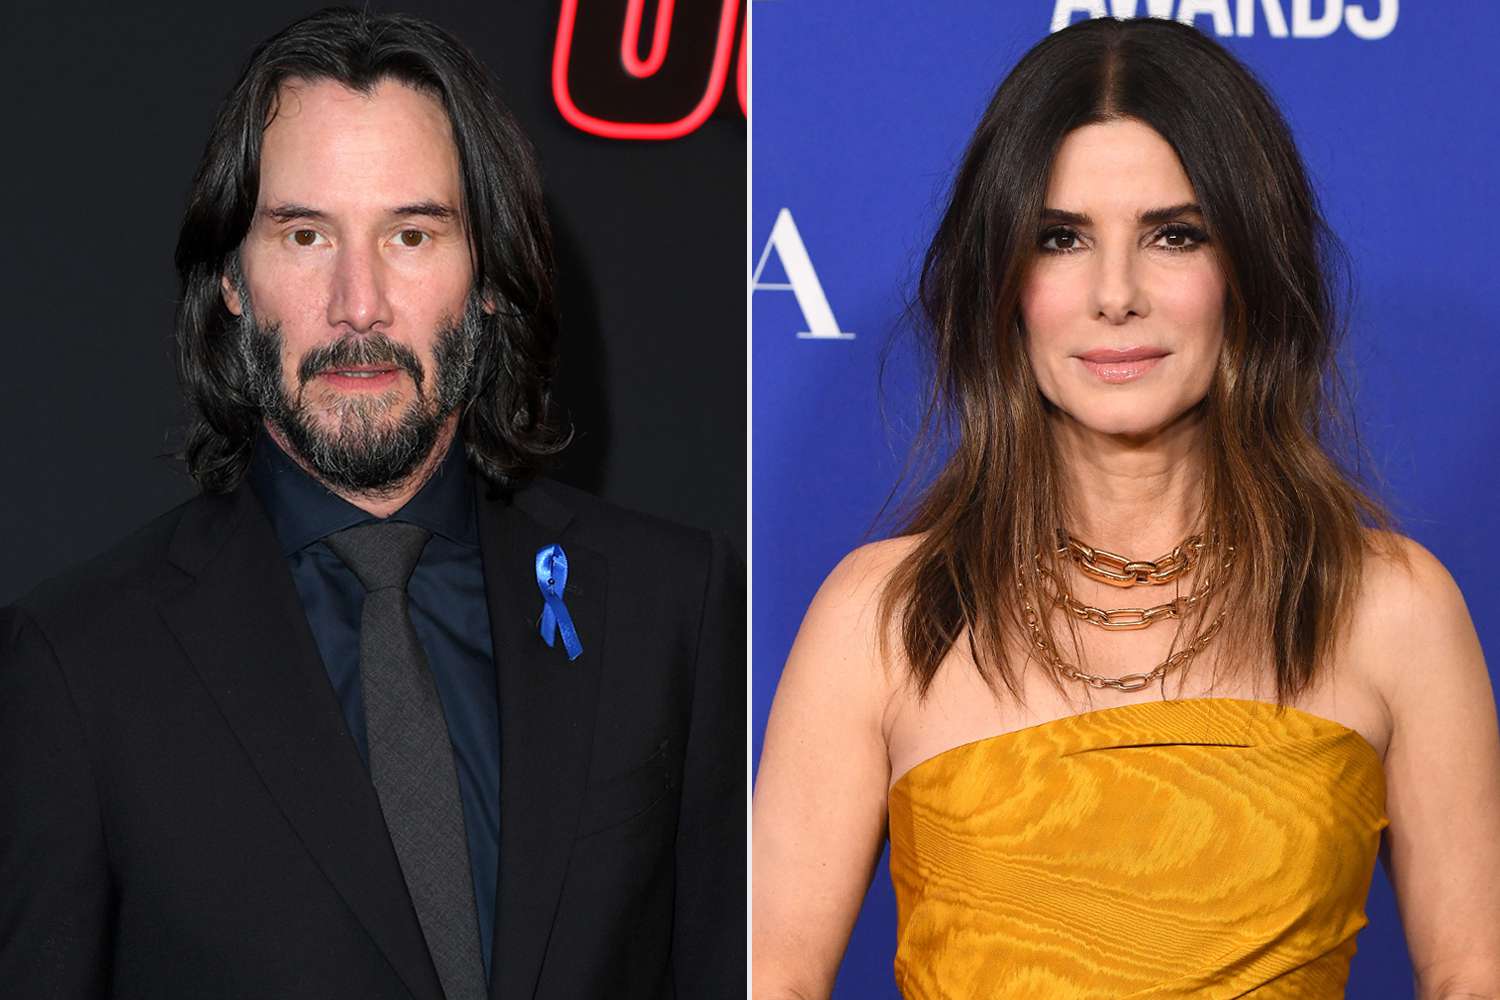 Sandra Bullock Wants to Act with “Speed ”Costar“ ”Keanu Reeves Again 'Before I Die'